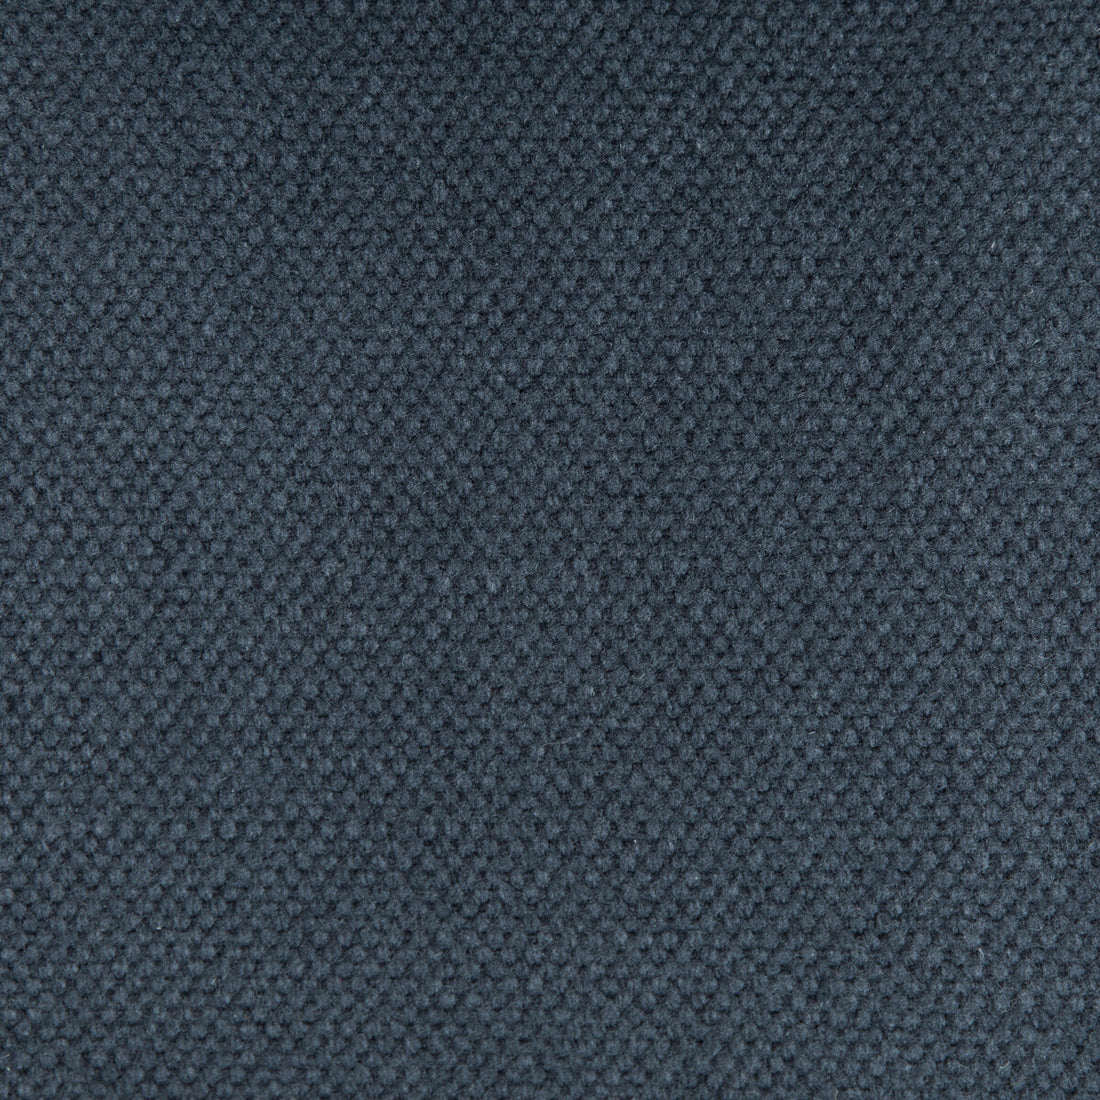 Lima fabric in navy color - pattern GDT5616.034.0 - by Gaston y Daniela in the Gaston Nuevo Mundo collection